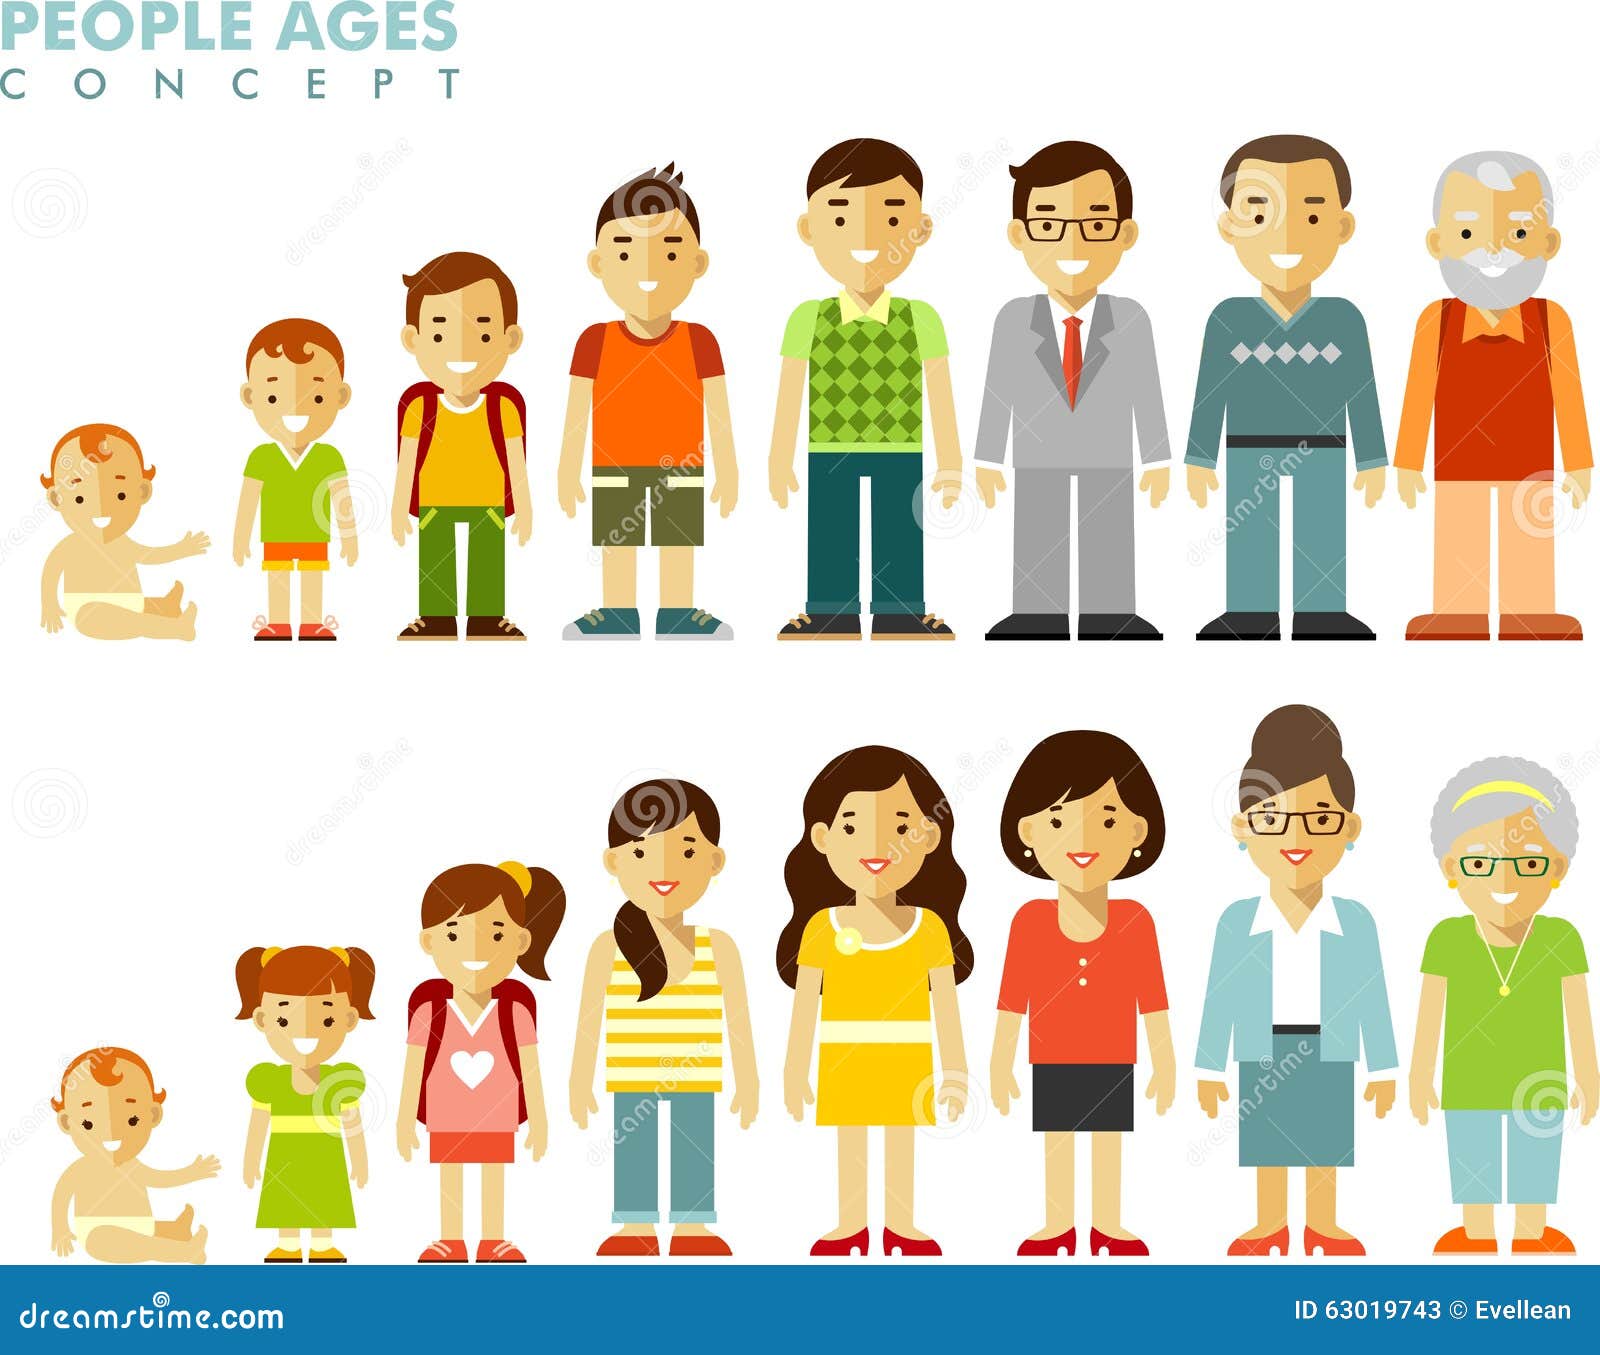 People Generations At Different Ages. Man And Woman Aging 